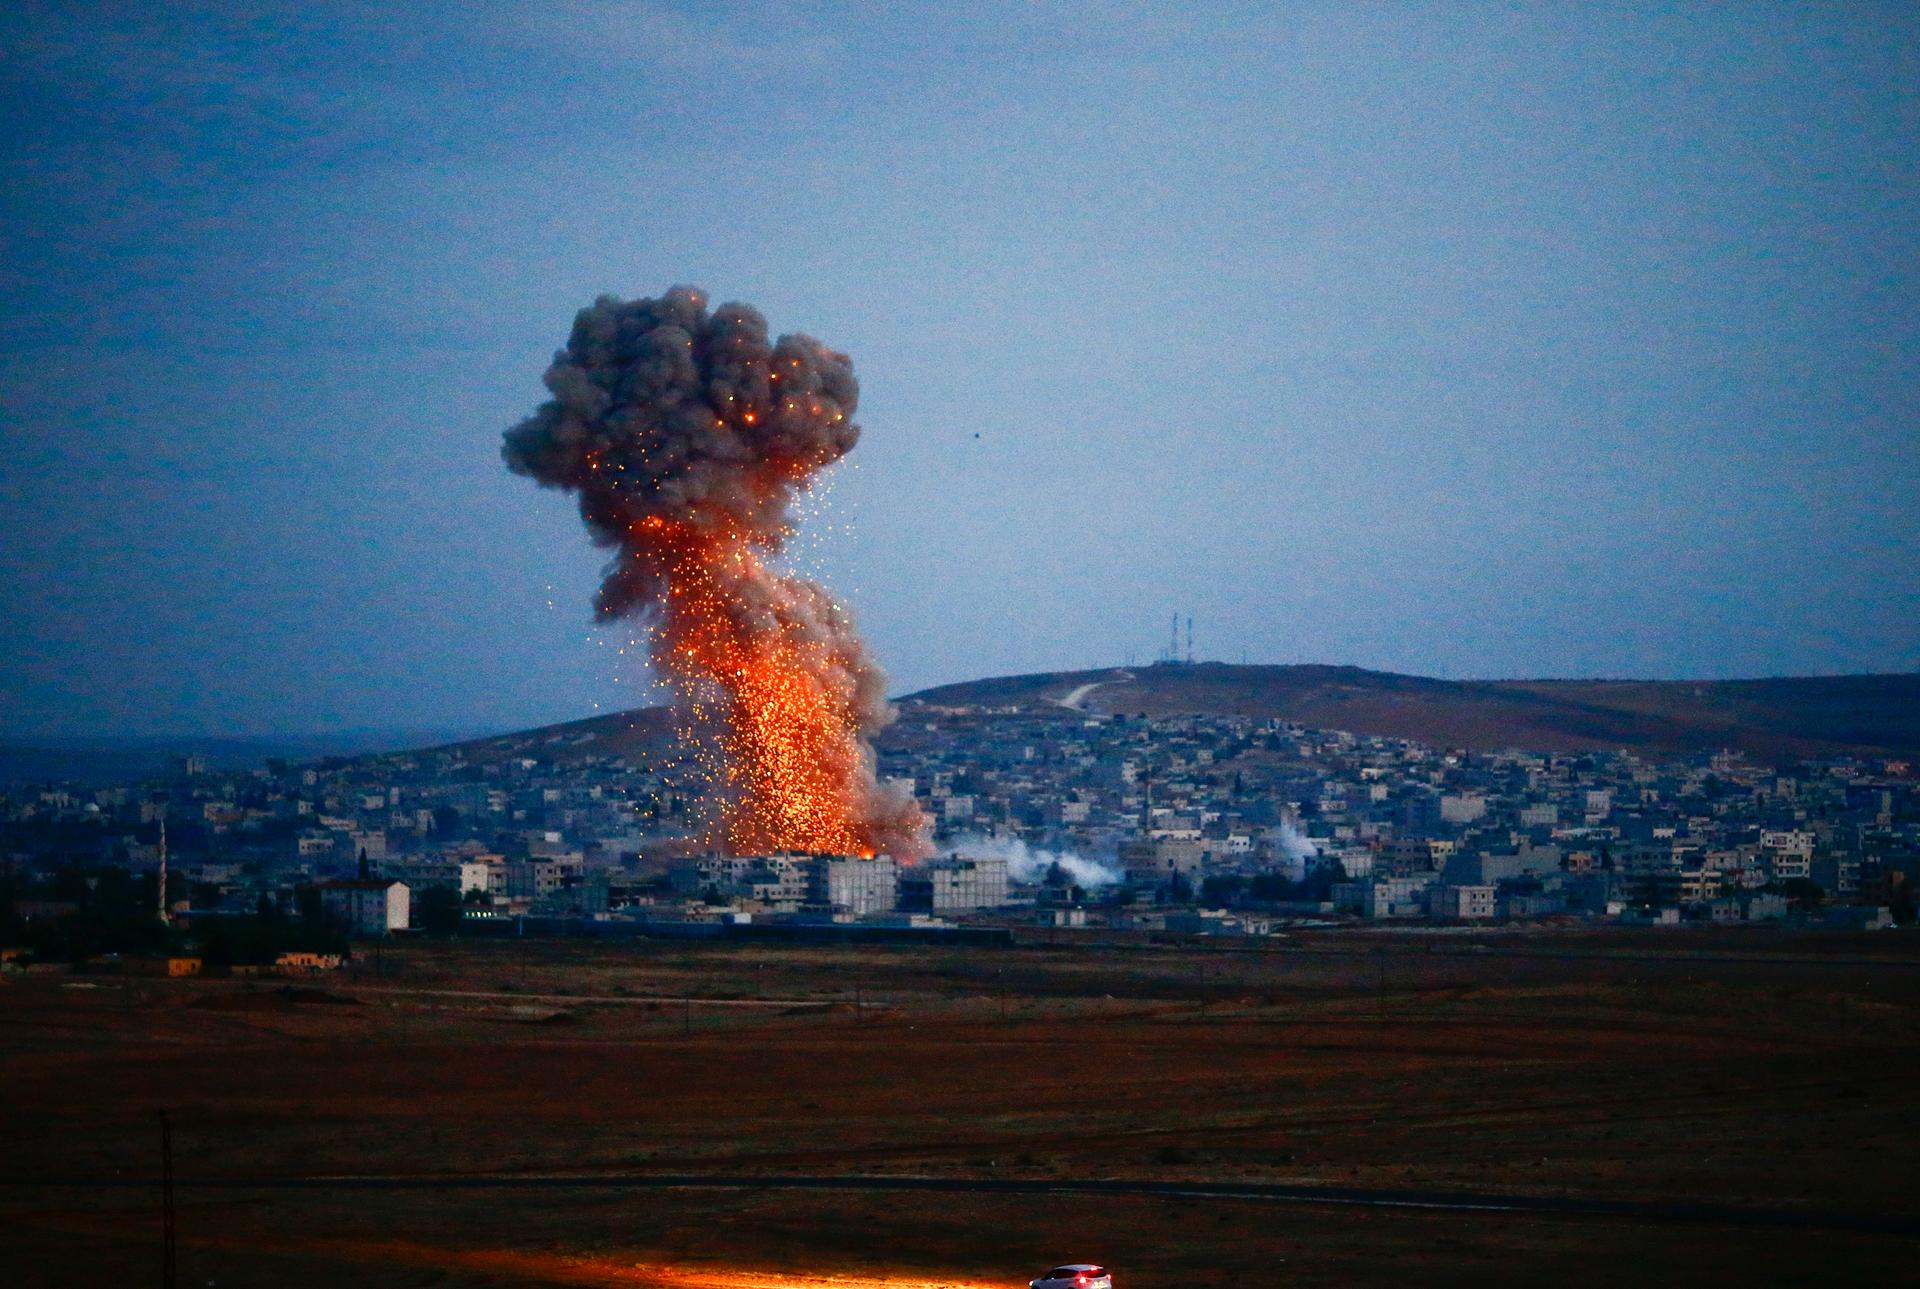 Smoke rises over Syrian town of Kobani after an airstrike, as seen from the Mursitpinar border crossing on the Turkish-Syrian border in the southeastern town of Suruc in Sanliurfa province, October 18, 2014. 